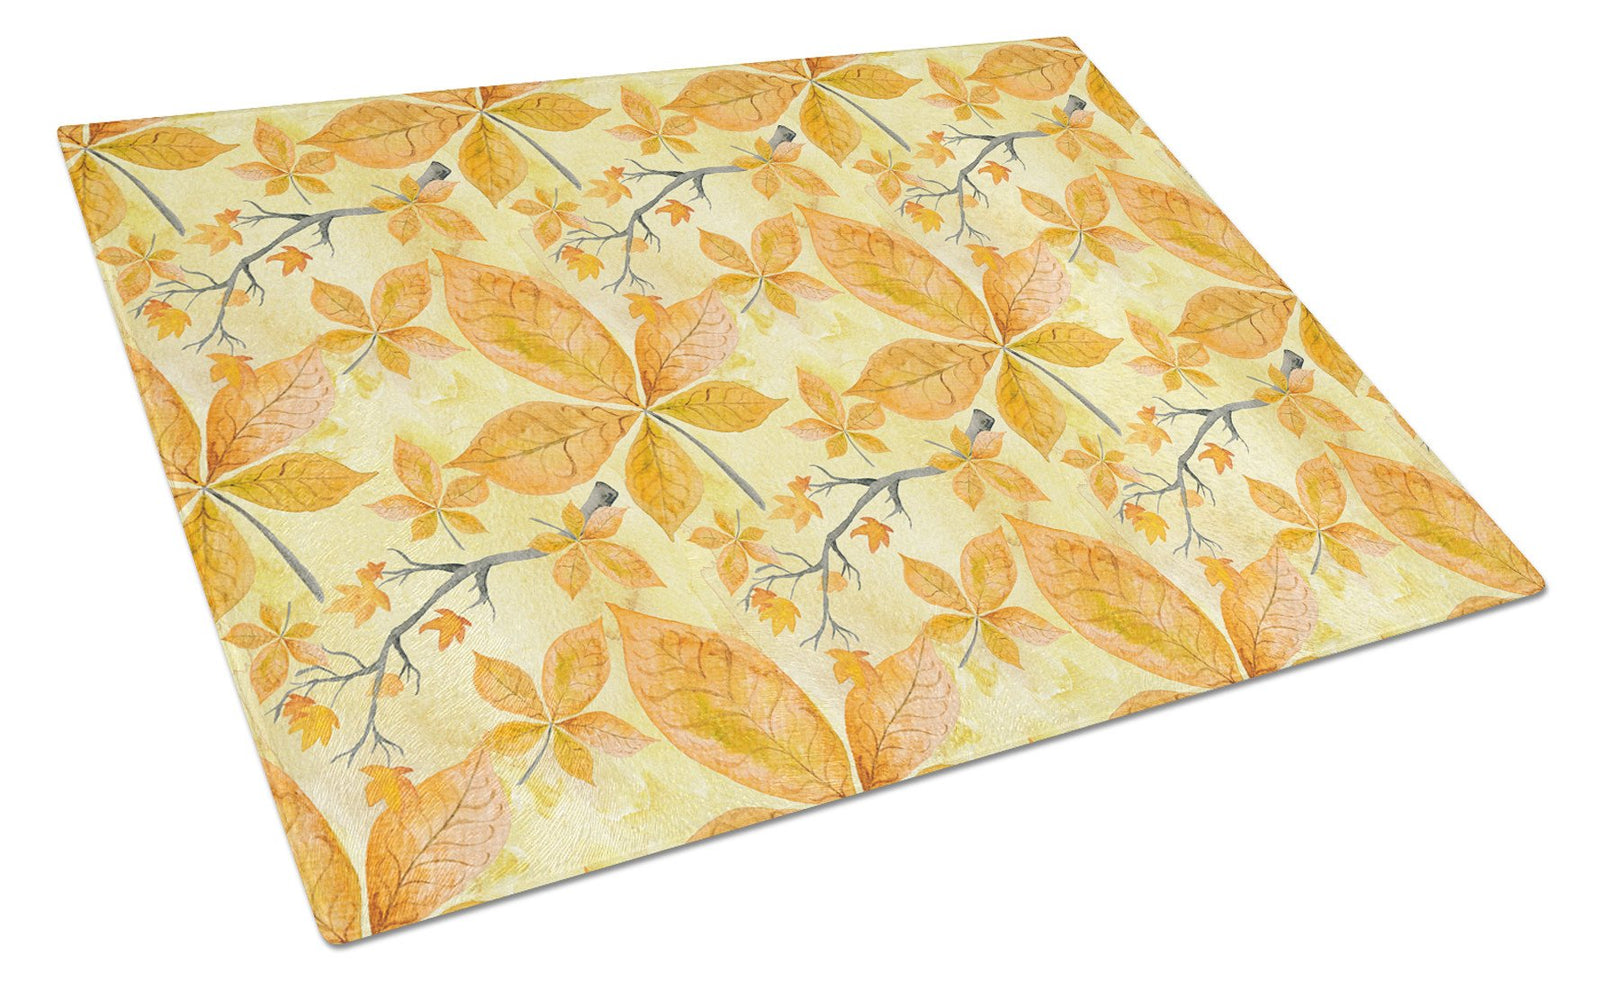 Fall Leaves and Branches Glass Cutting Board Large BB7495LCB by Caroline's Treasures